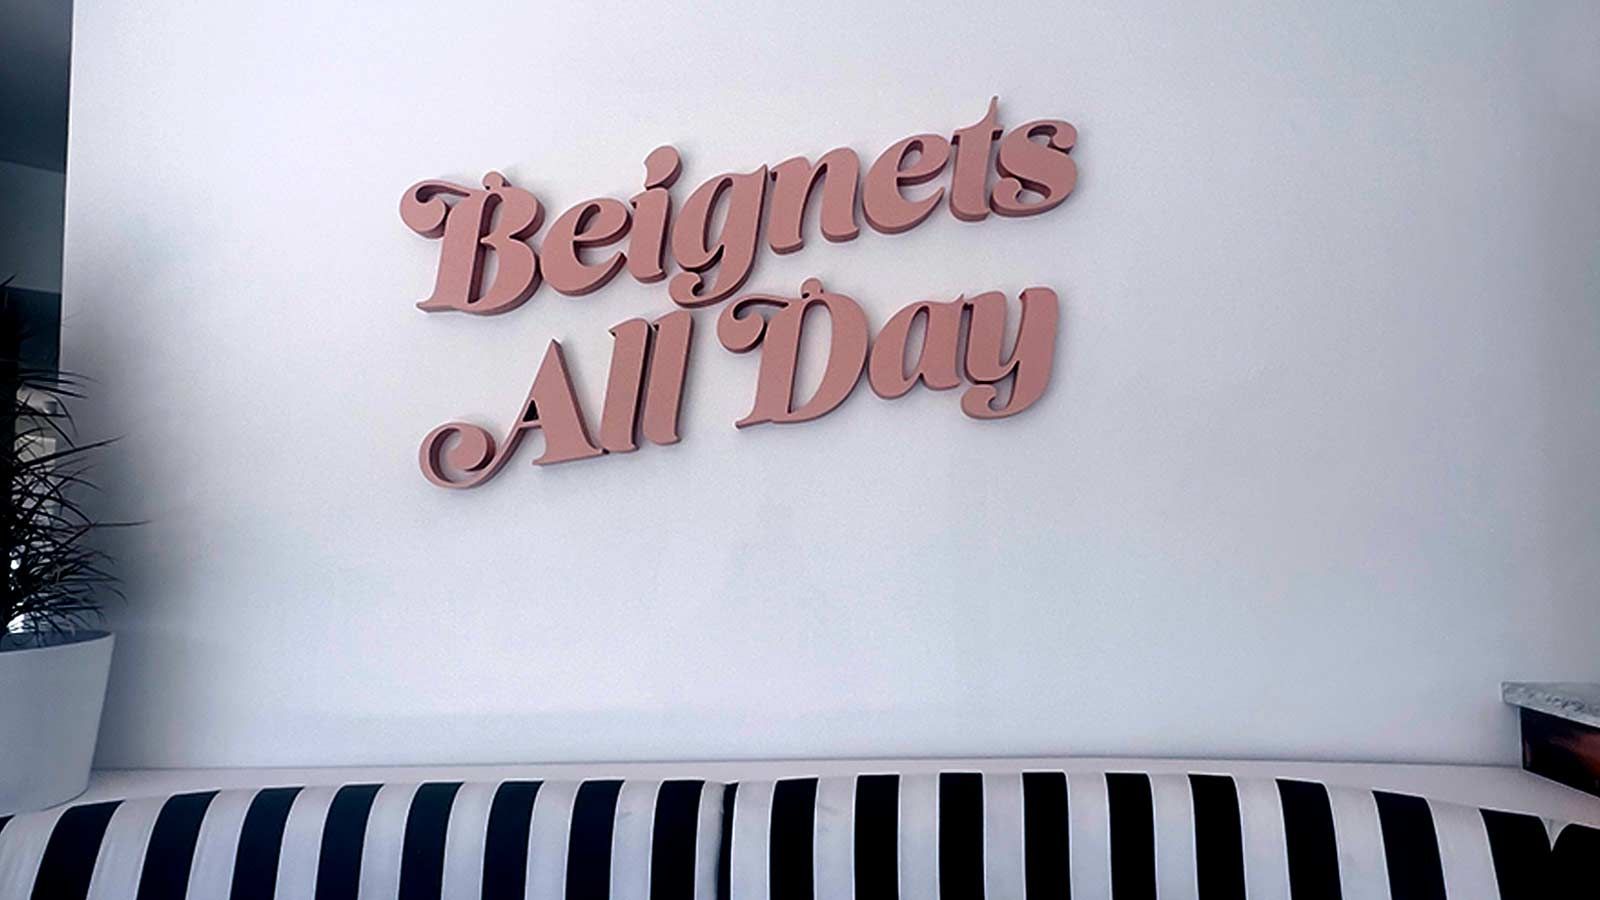 Beignets All Day foam core sign mounted on the wall